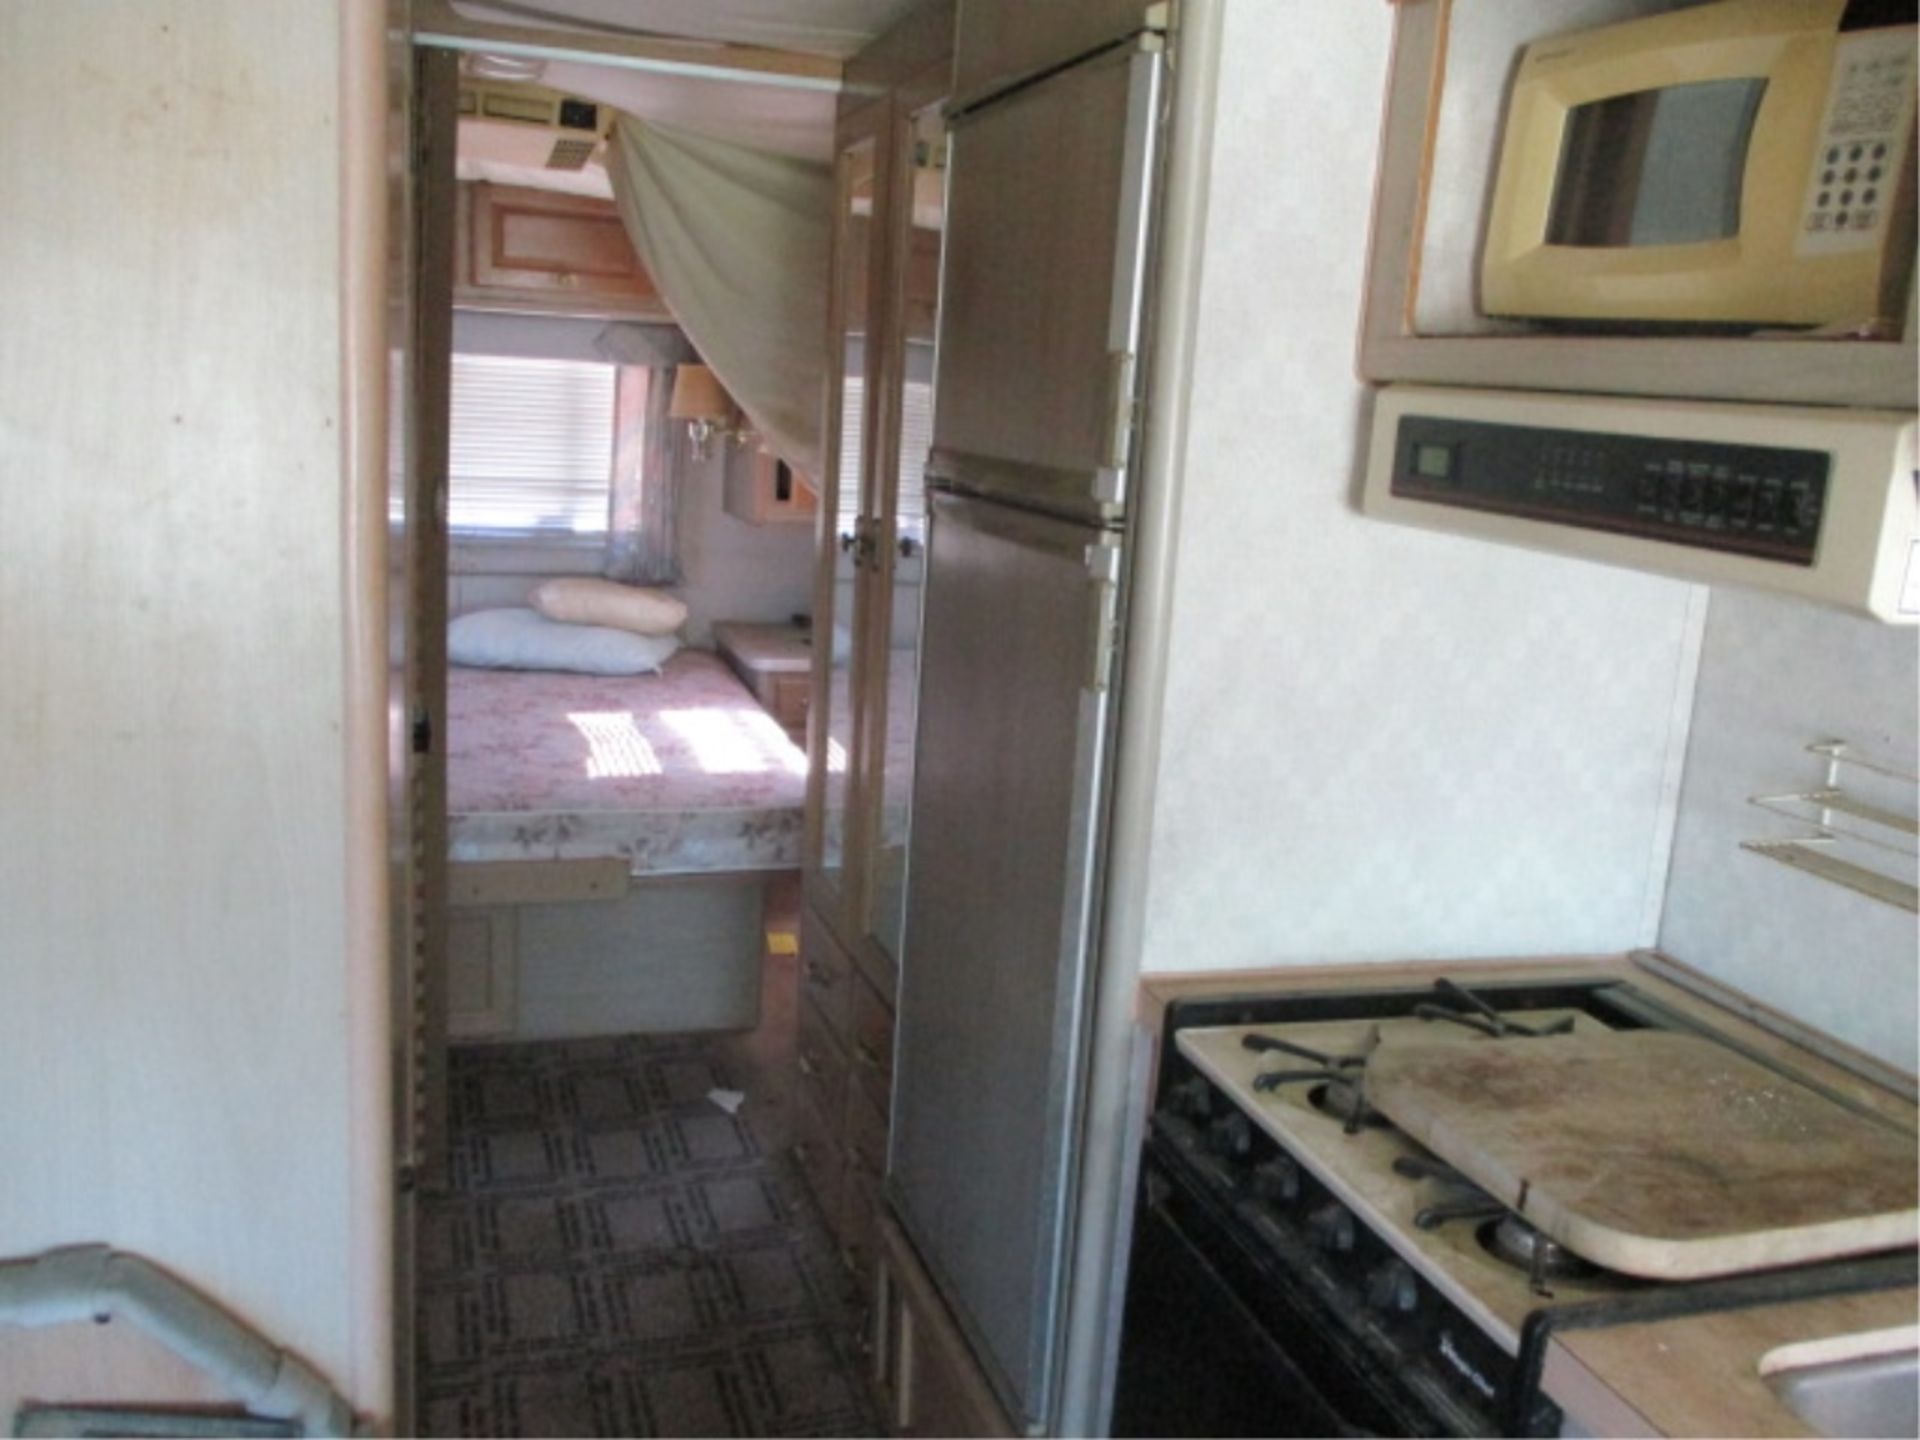 Fleetwood Southwind Motor Home, V8 Gas, Automatic, Refrigerator, Microwave, Stove, Bathroom W/ - Image 91 of 121